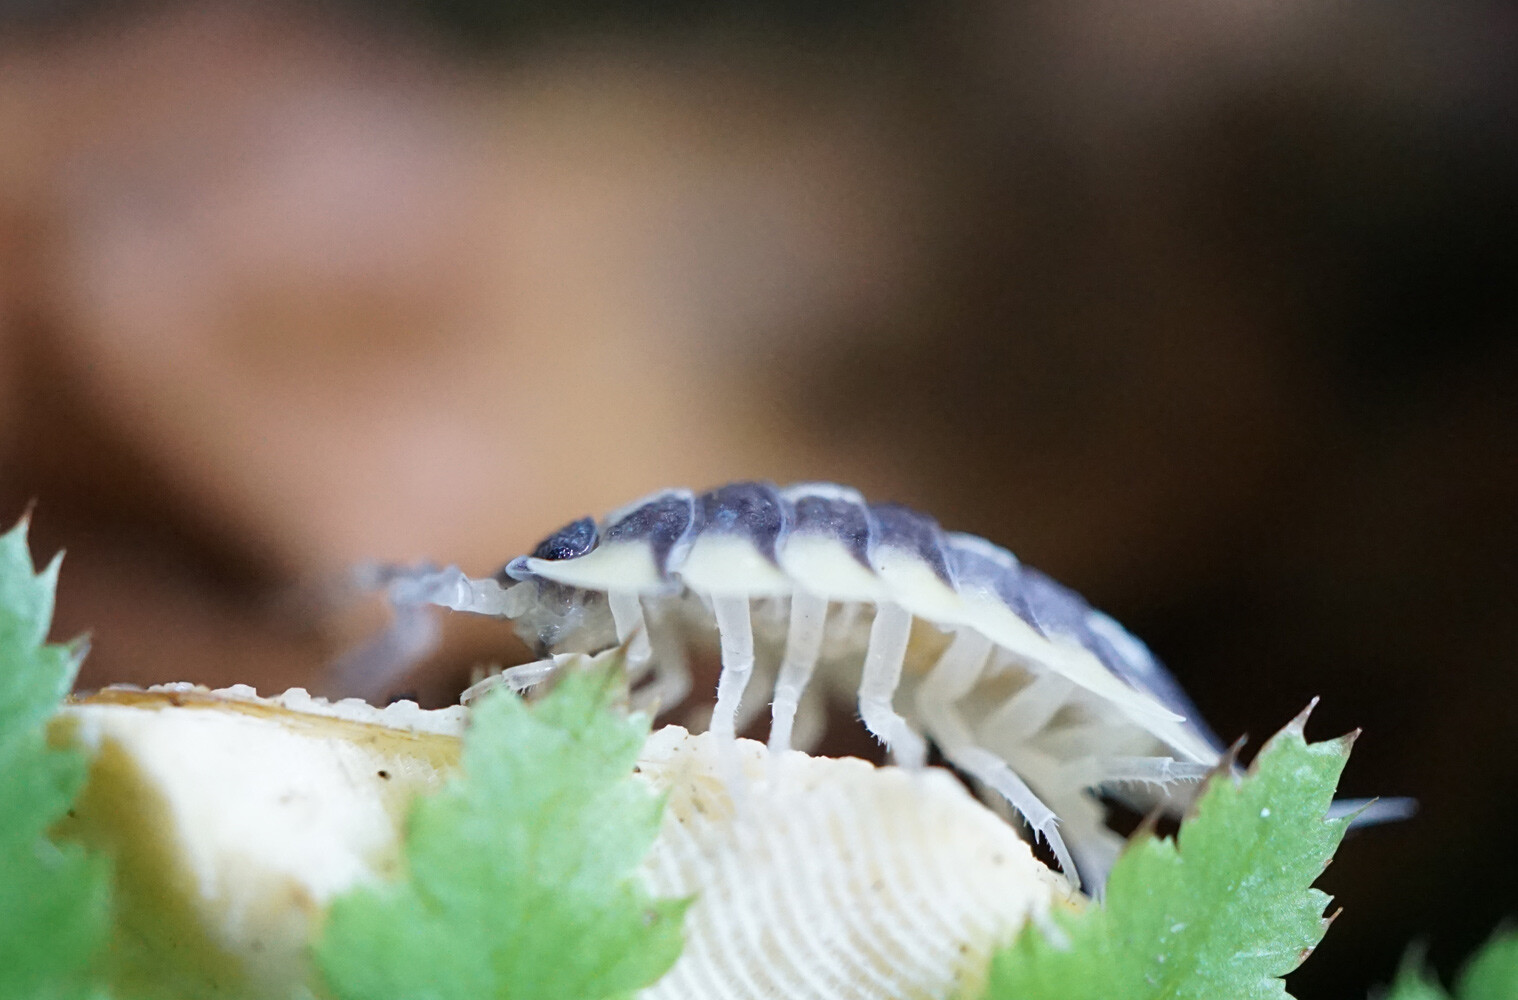 Female Porcellio expansus. Her brood pouch (marsupium) is slightly visible.